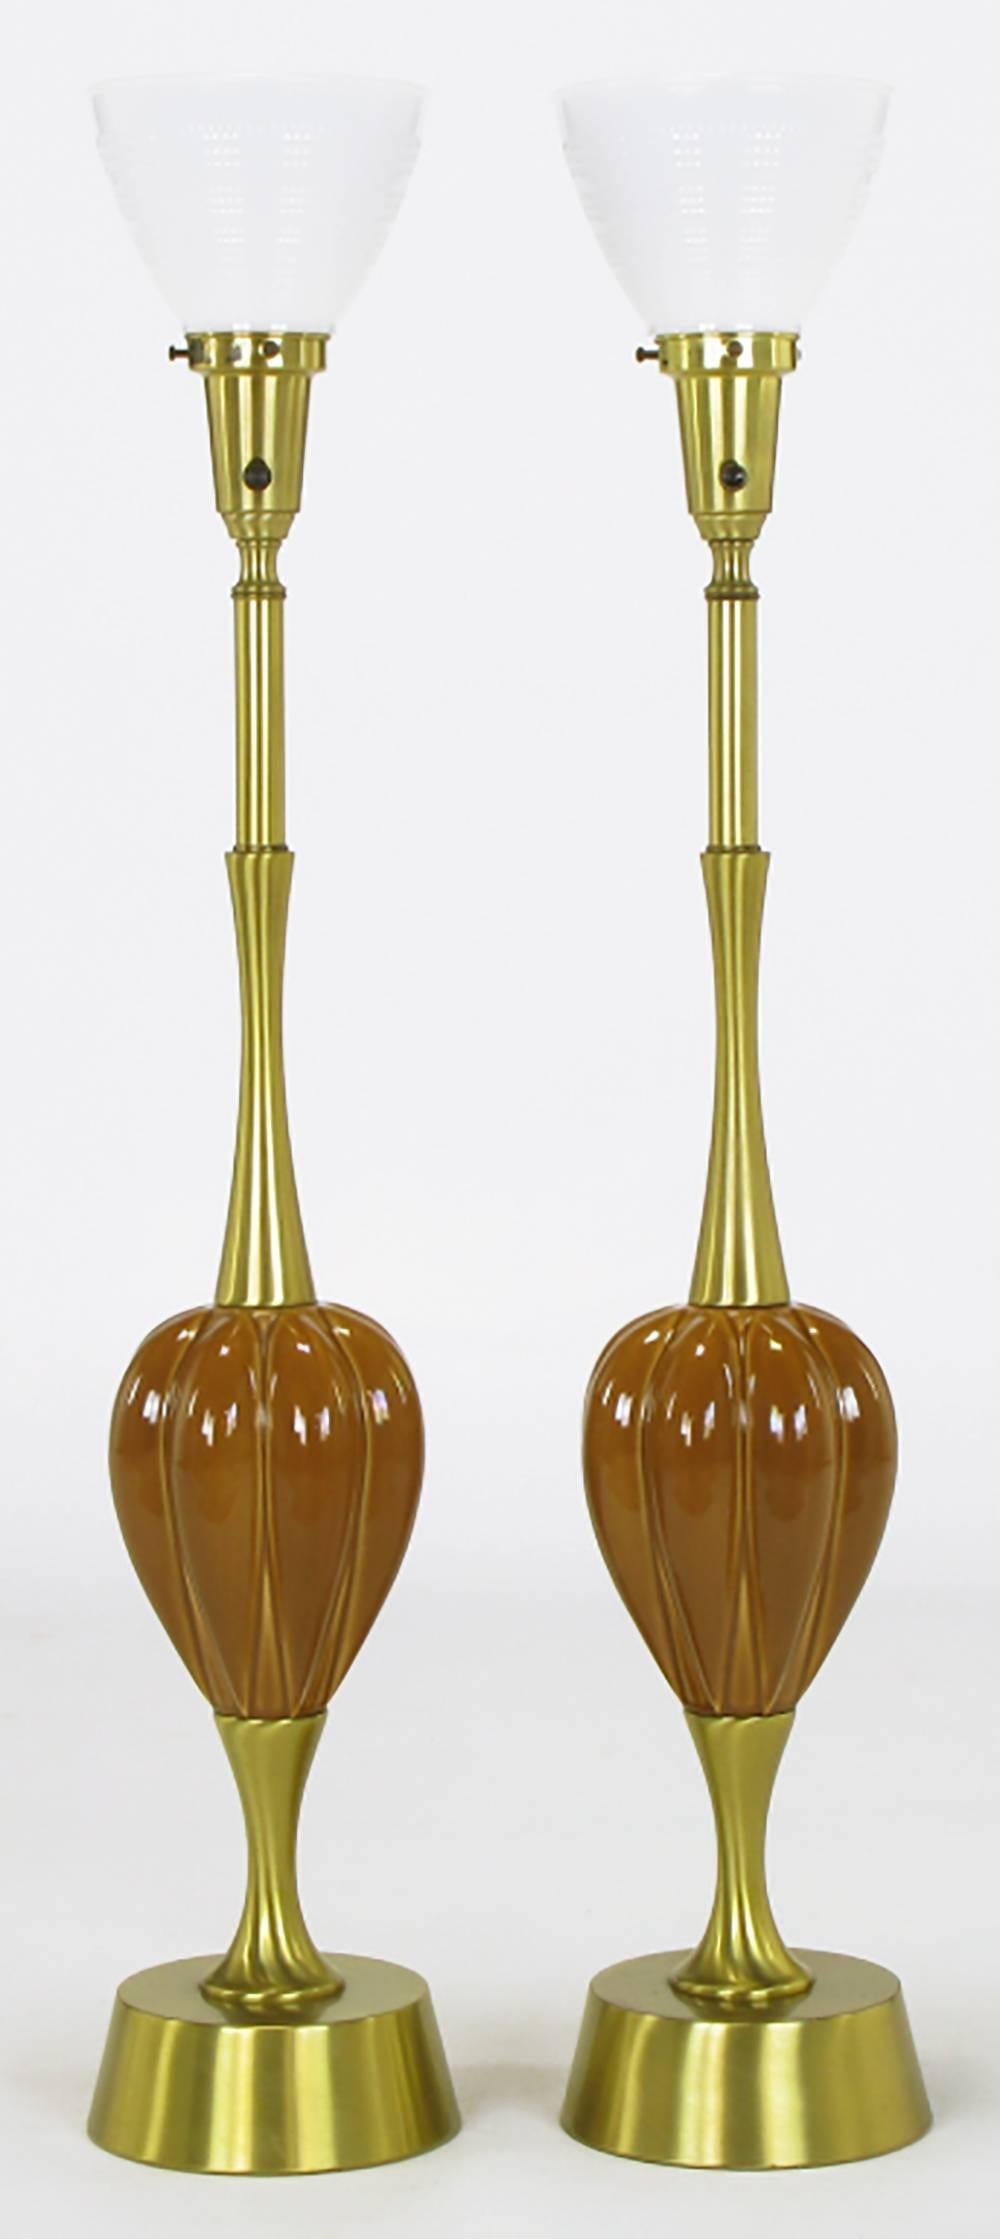 Pair of sizable brushed brass and umber ceramic inverted gourd form bodied table lamps by Rembrandt Lamp Company. Sleek and minimal base, stems and richly glazed ceramic gourd form body with milk glass diffusers.